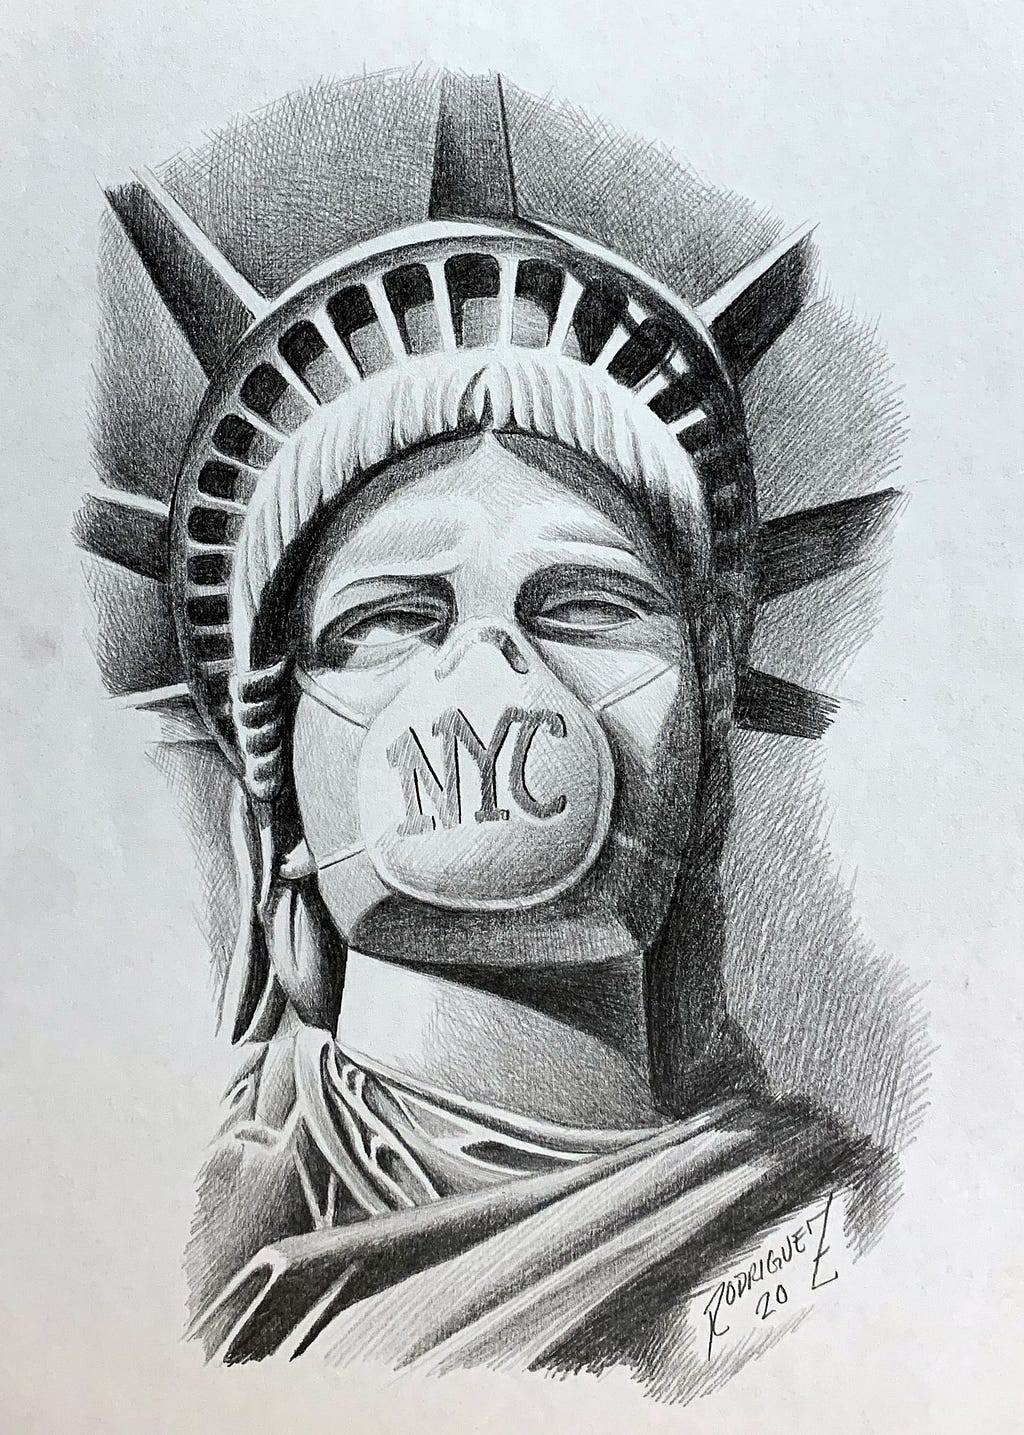 Art by Edward Rodriguez: Face of the statue of liberty wearing a mask that says “NYC”